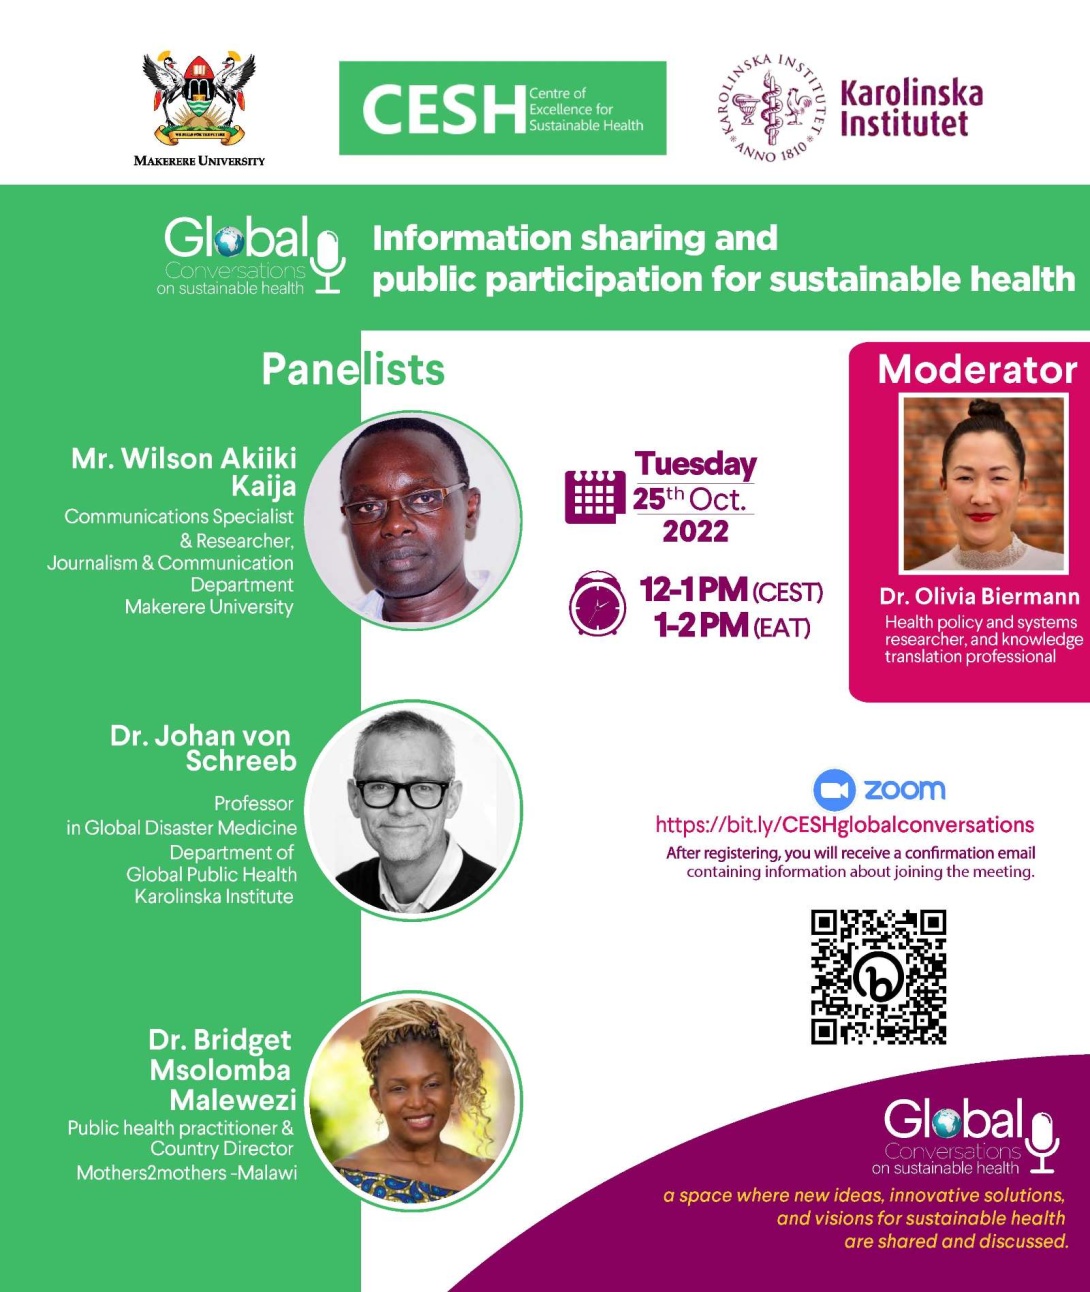 CESH Global Conversations: Information sharing and public participation for sustainable health, 25th October 2022 at 12-1 PM (CEST) / 1-2 PM (EAT) on ZOOM.